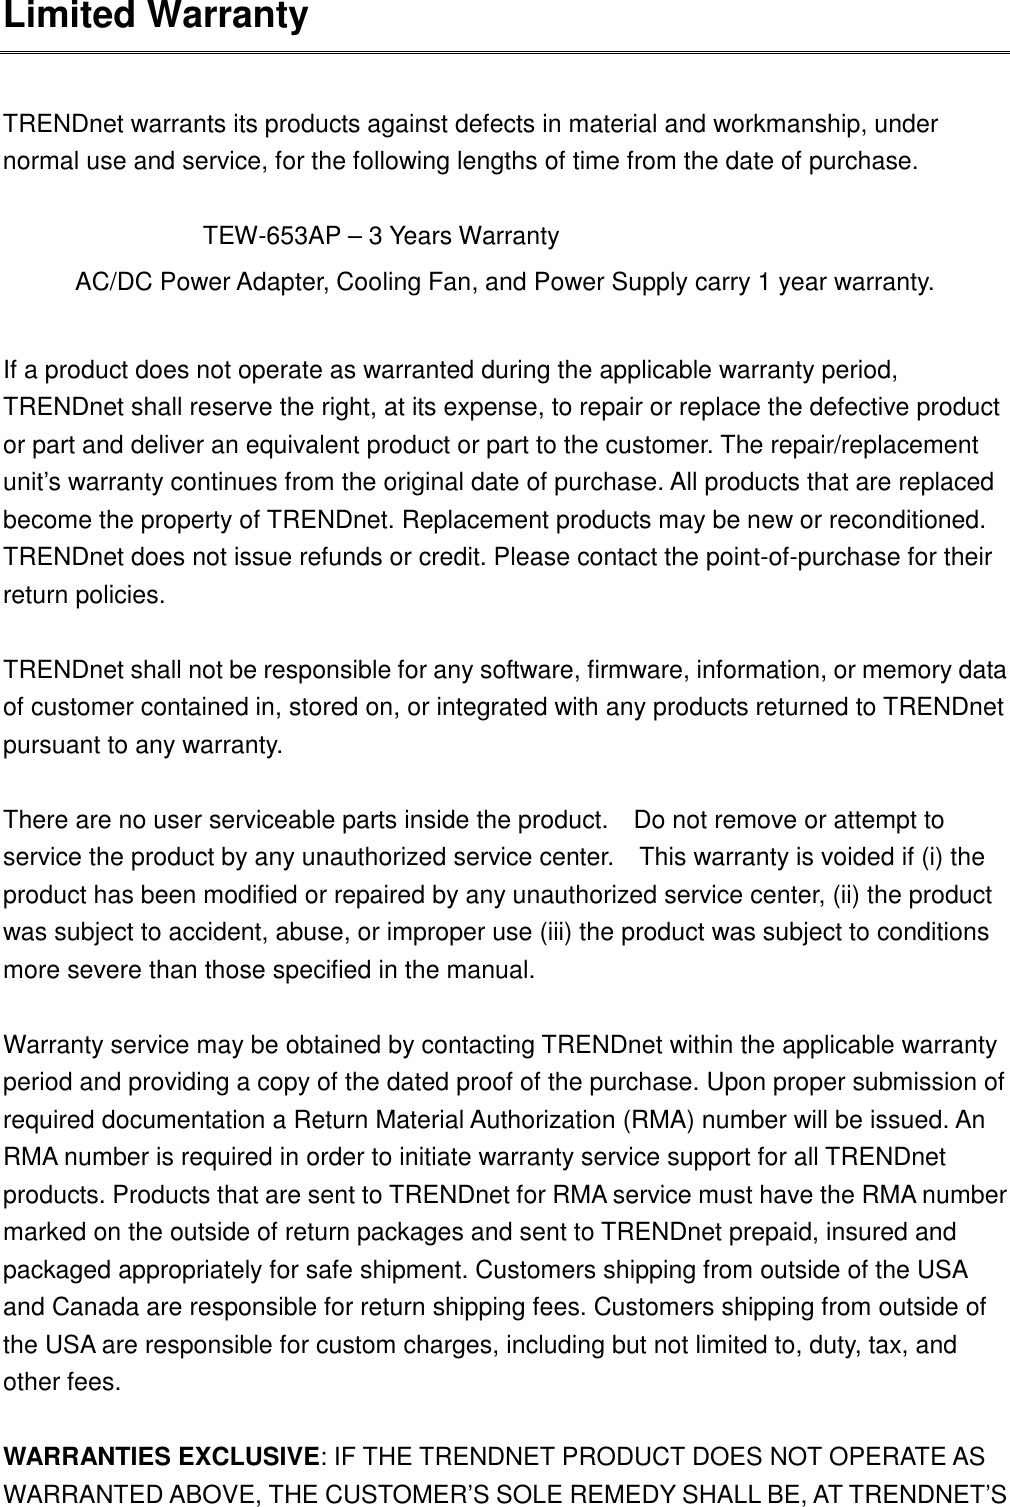 Limited Warranty  TRENDnet warrants its products against defects in material and workmanship, under normal use and service, for the following lengths of time from the date of purchase.                TEW-653AP – 3 Years Warranty AC/DC Power Adapter, Cooling Fan, and Power Supply carry 1 year warranty.  If a product does not operate as warranted during the applicable warranty period, TRENDnet shall reserve the right, at its expense, to repair or replace the defective product or part and deliver an equivalent product or part to the customer. The repair/replacement unit’s warranty continues from the original date of purchase. All products that are replaced become the property of TRENDnet. Replacement products may be new or reconditioned. TRENDnet does not issue refunds or credit. Please contact the point-of-purchase for their return policies.  TRENDnet shall not be responsible for any software, firmware, information, or memory data of customer contained in, stored on, or integrated with any products returned to TRENDnet pursuant to any warranty.  There are no user serviceable parts inside the product.    Do not remove or attempt to service the product by any unauthorized service center.    This warranty is voided if (i) the product has been modified or repaired by any unauthorized service center, (ii) the product was subject to accident, abuse, or improper use (iii) the product was subject to conditions more severe than those specified in the manual.  Warranty service may be obtained by contacting TRENDnet within the applicable warranty period and providing a copy of the dated proof of the purchase. Upon proper submission of required documentation a Return Material Authorization (RMA) number will be issued. An RMA number is required in order to initiate warranty service support for all TRENDnet products. Products that are sent to TRENDnet for RMA service must have the RMA number marked on the outside of return packages and sent to TRENDnet prepaid, insured and packaged appropriately for safe shipment. Customers shipping from outside of the USA and Canada are responsible for return shipping fees. Customers shipping from outside of the USA are responsible for custom charges, including but not limited to, duty, tax, and other fees.  WARRANTIES EXCLUSIVE: IF THE TRENDNET PRODUCT DOES NOT OPERATE AS WARRANTED ABOVE, THE CUSTOMER’S SOLE REMEDY SHALL BE, AT TRENDNET’S 